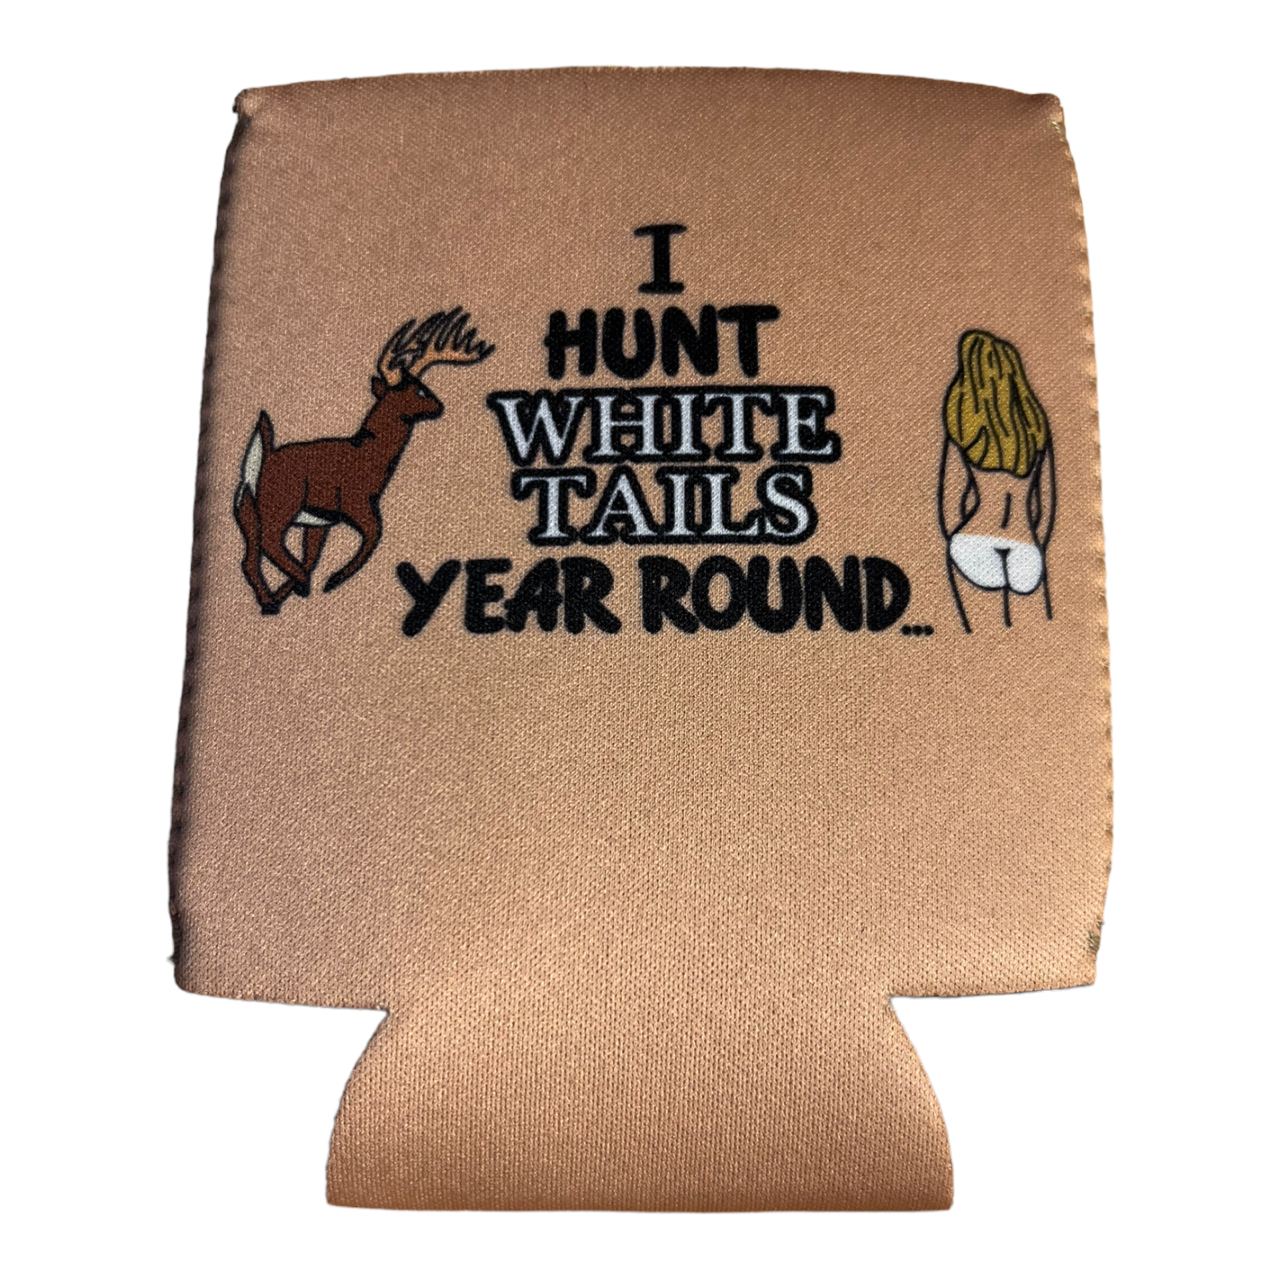 I Hunt White Tails Year Round Funny Beer Can Cooler Holder Sleeve